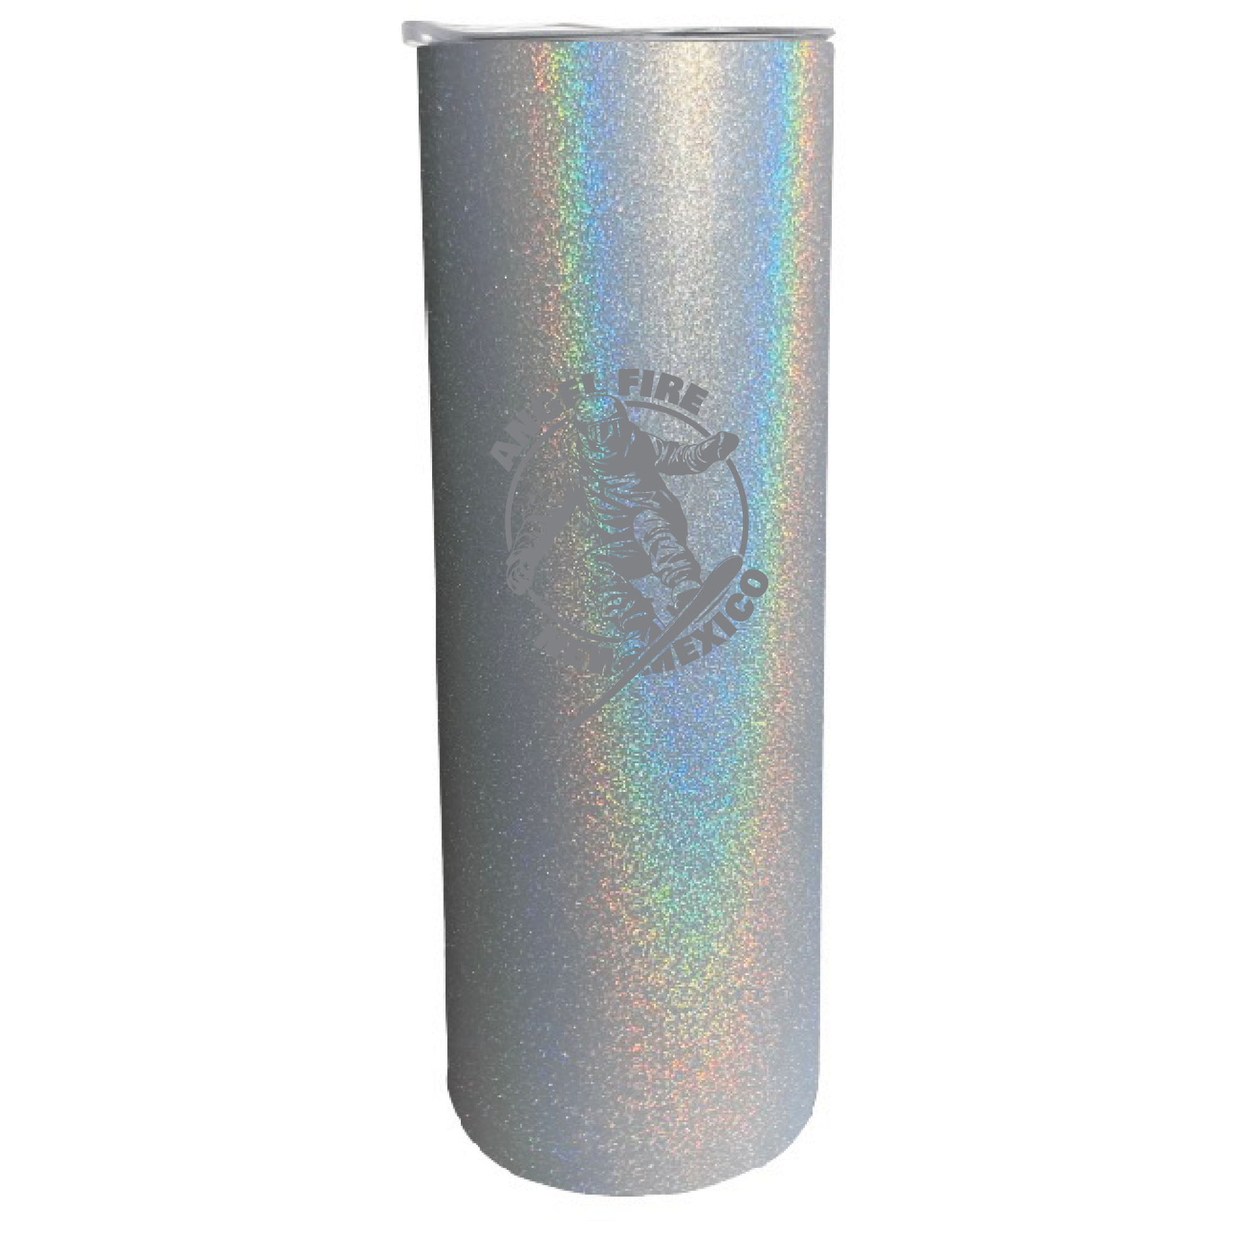 Angel Fire New Mexico Souvenir 20 Oz Engraved Insulated Stainless Steel Skinny Tumbler - Gray Glitter,,4-Pack